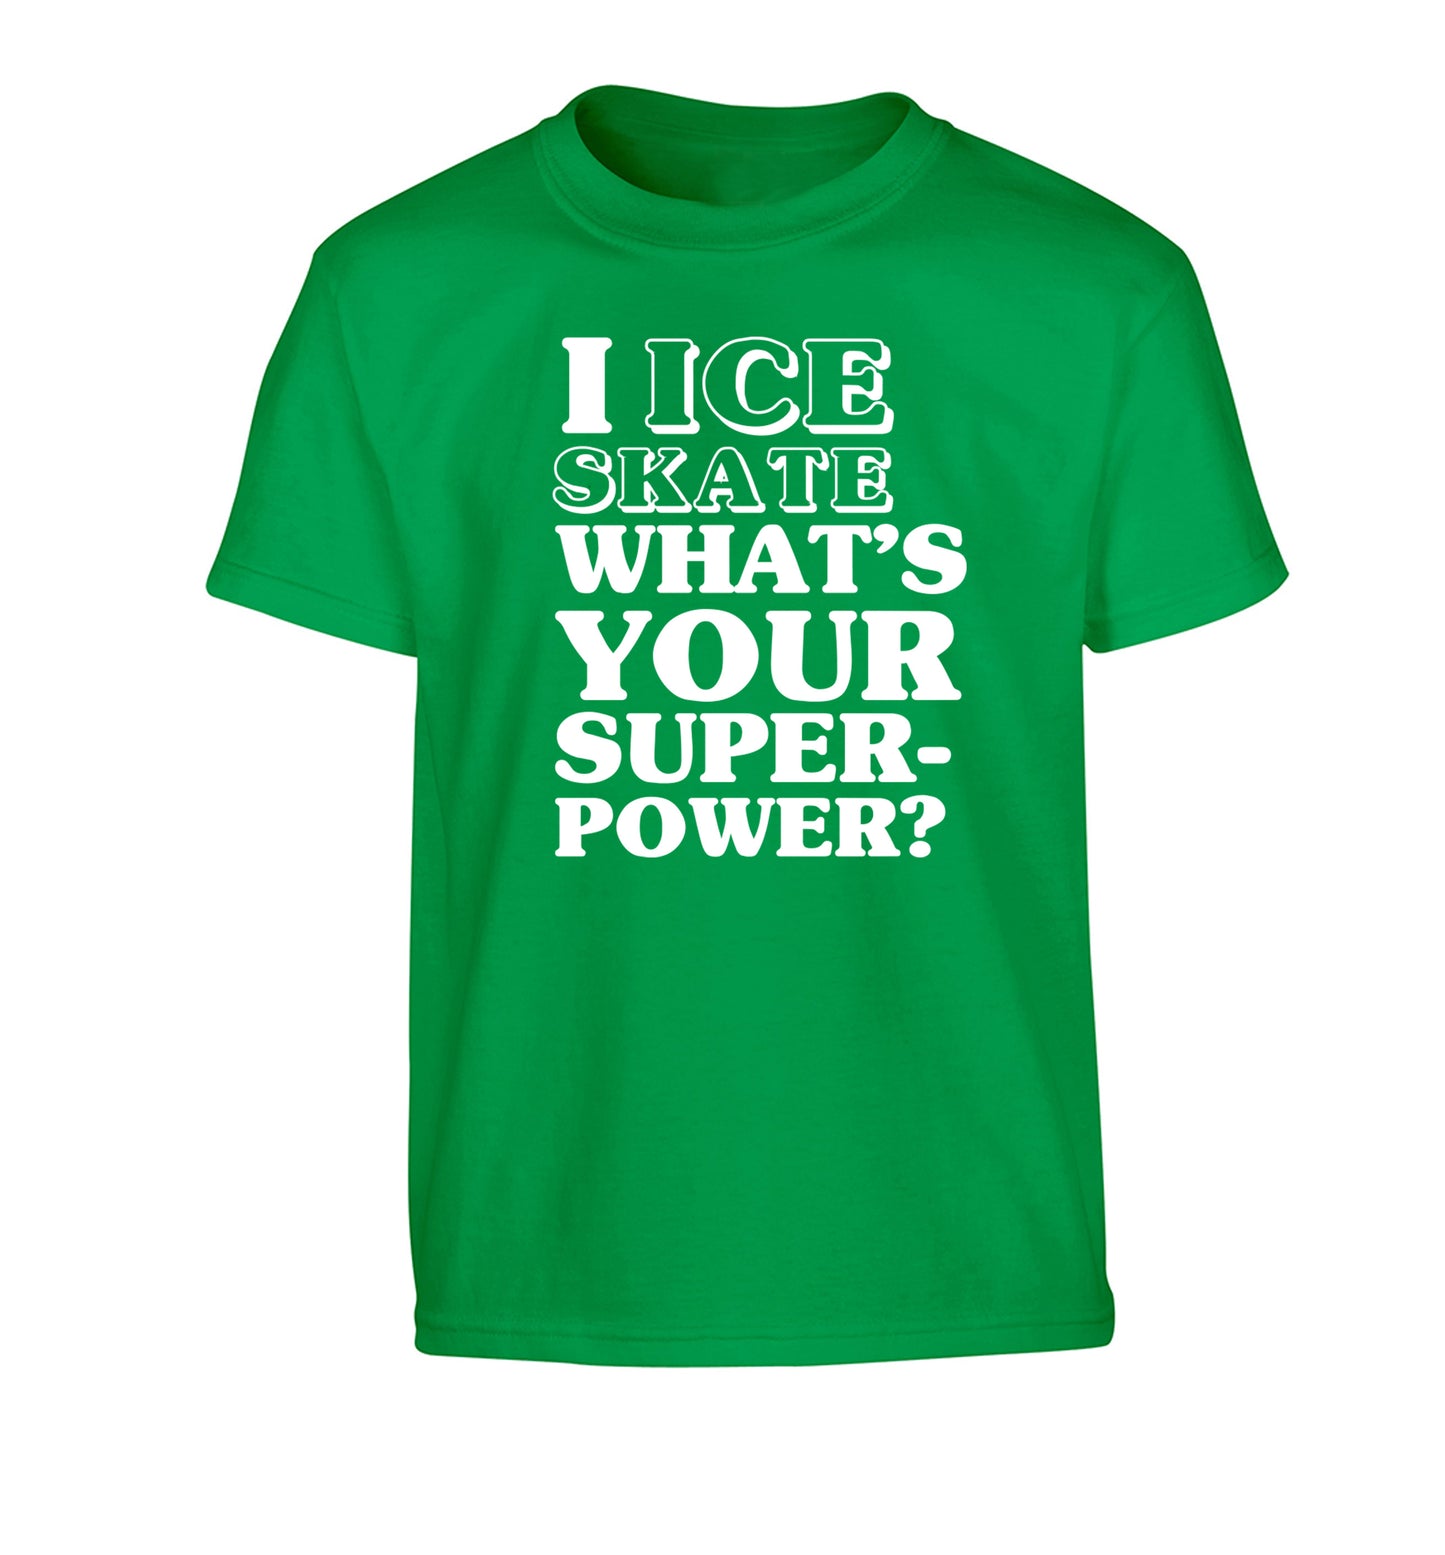 I ice skate what's your superpower? Children's green Tshirt 12-14 Years